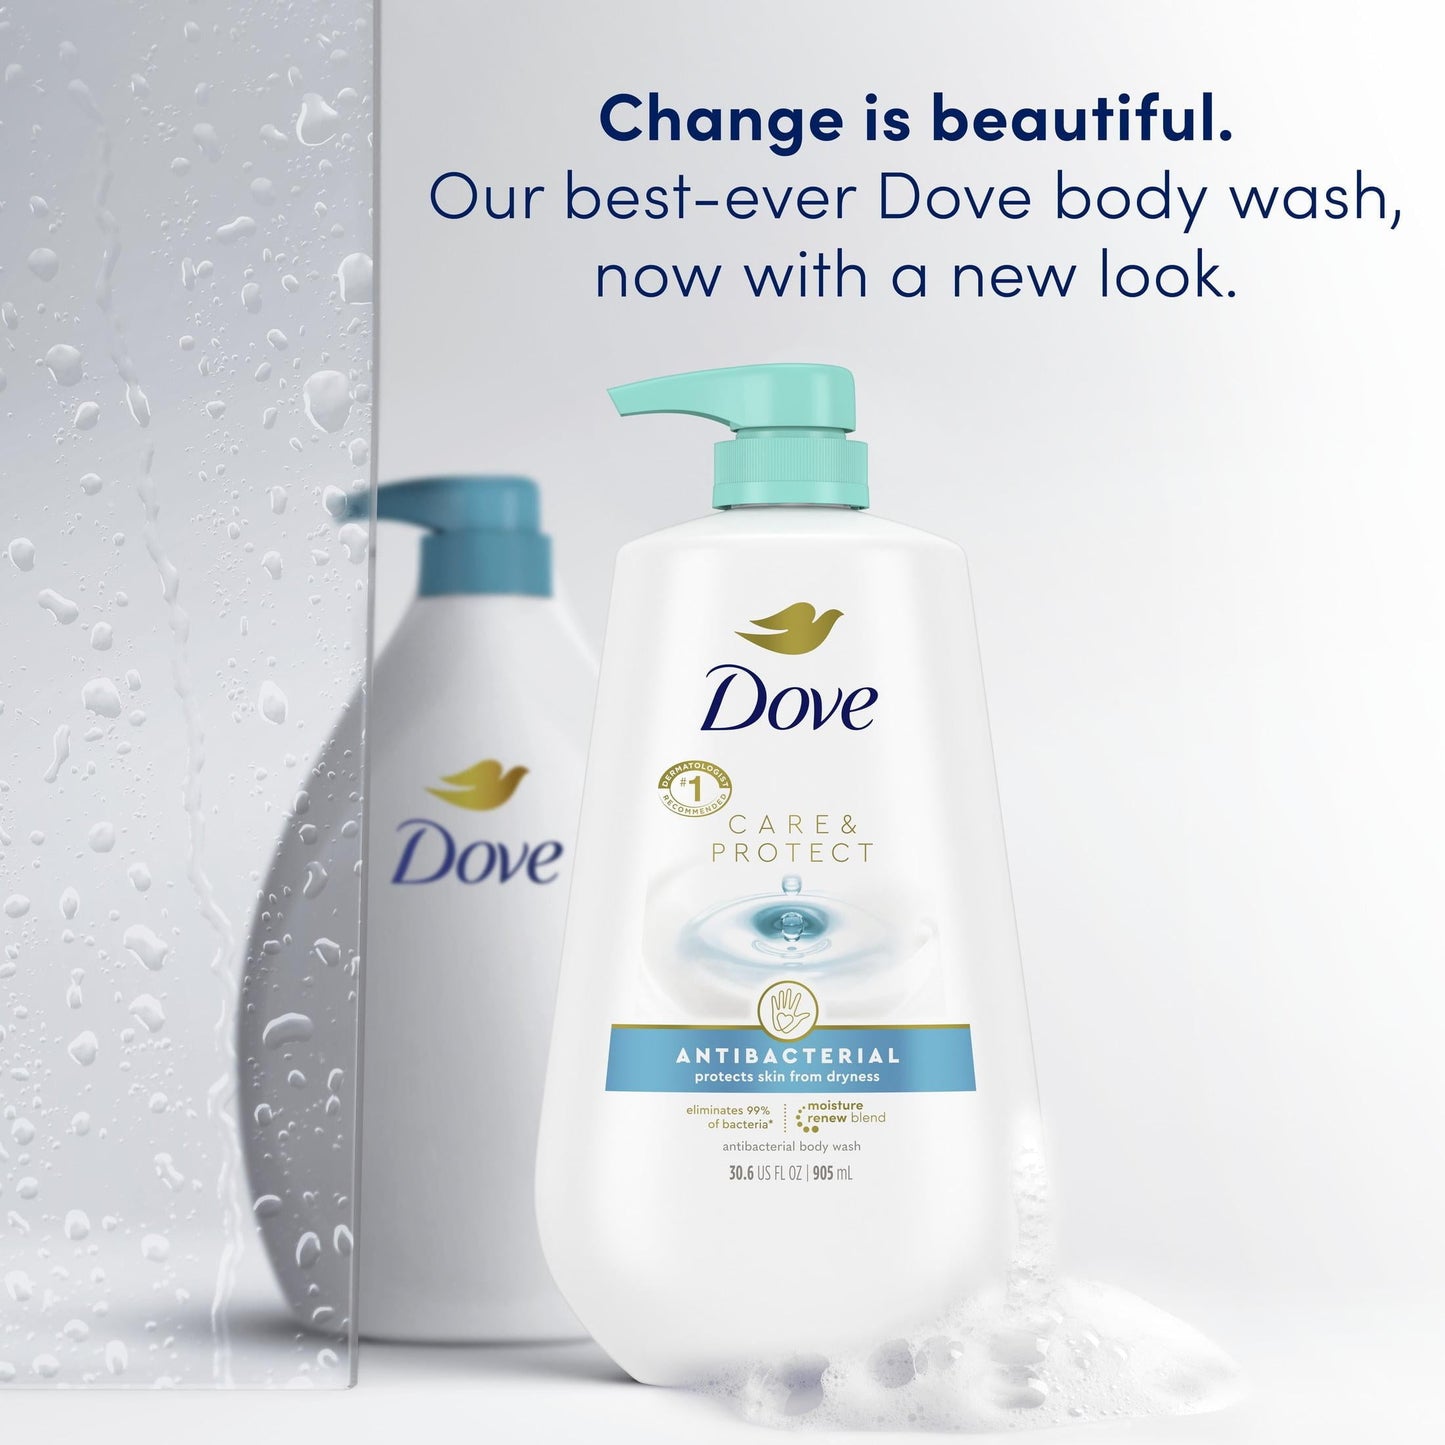 Dove Care and Protect Daily Use Antibacterial Hand Soap, 34 fl oz